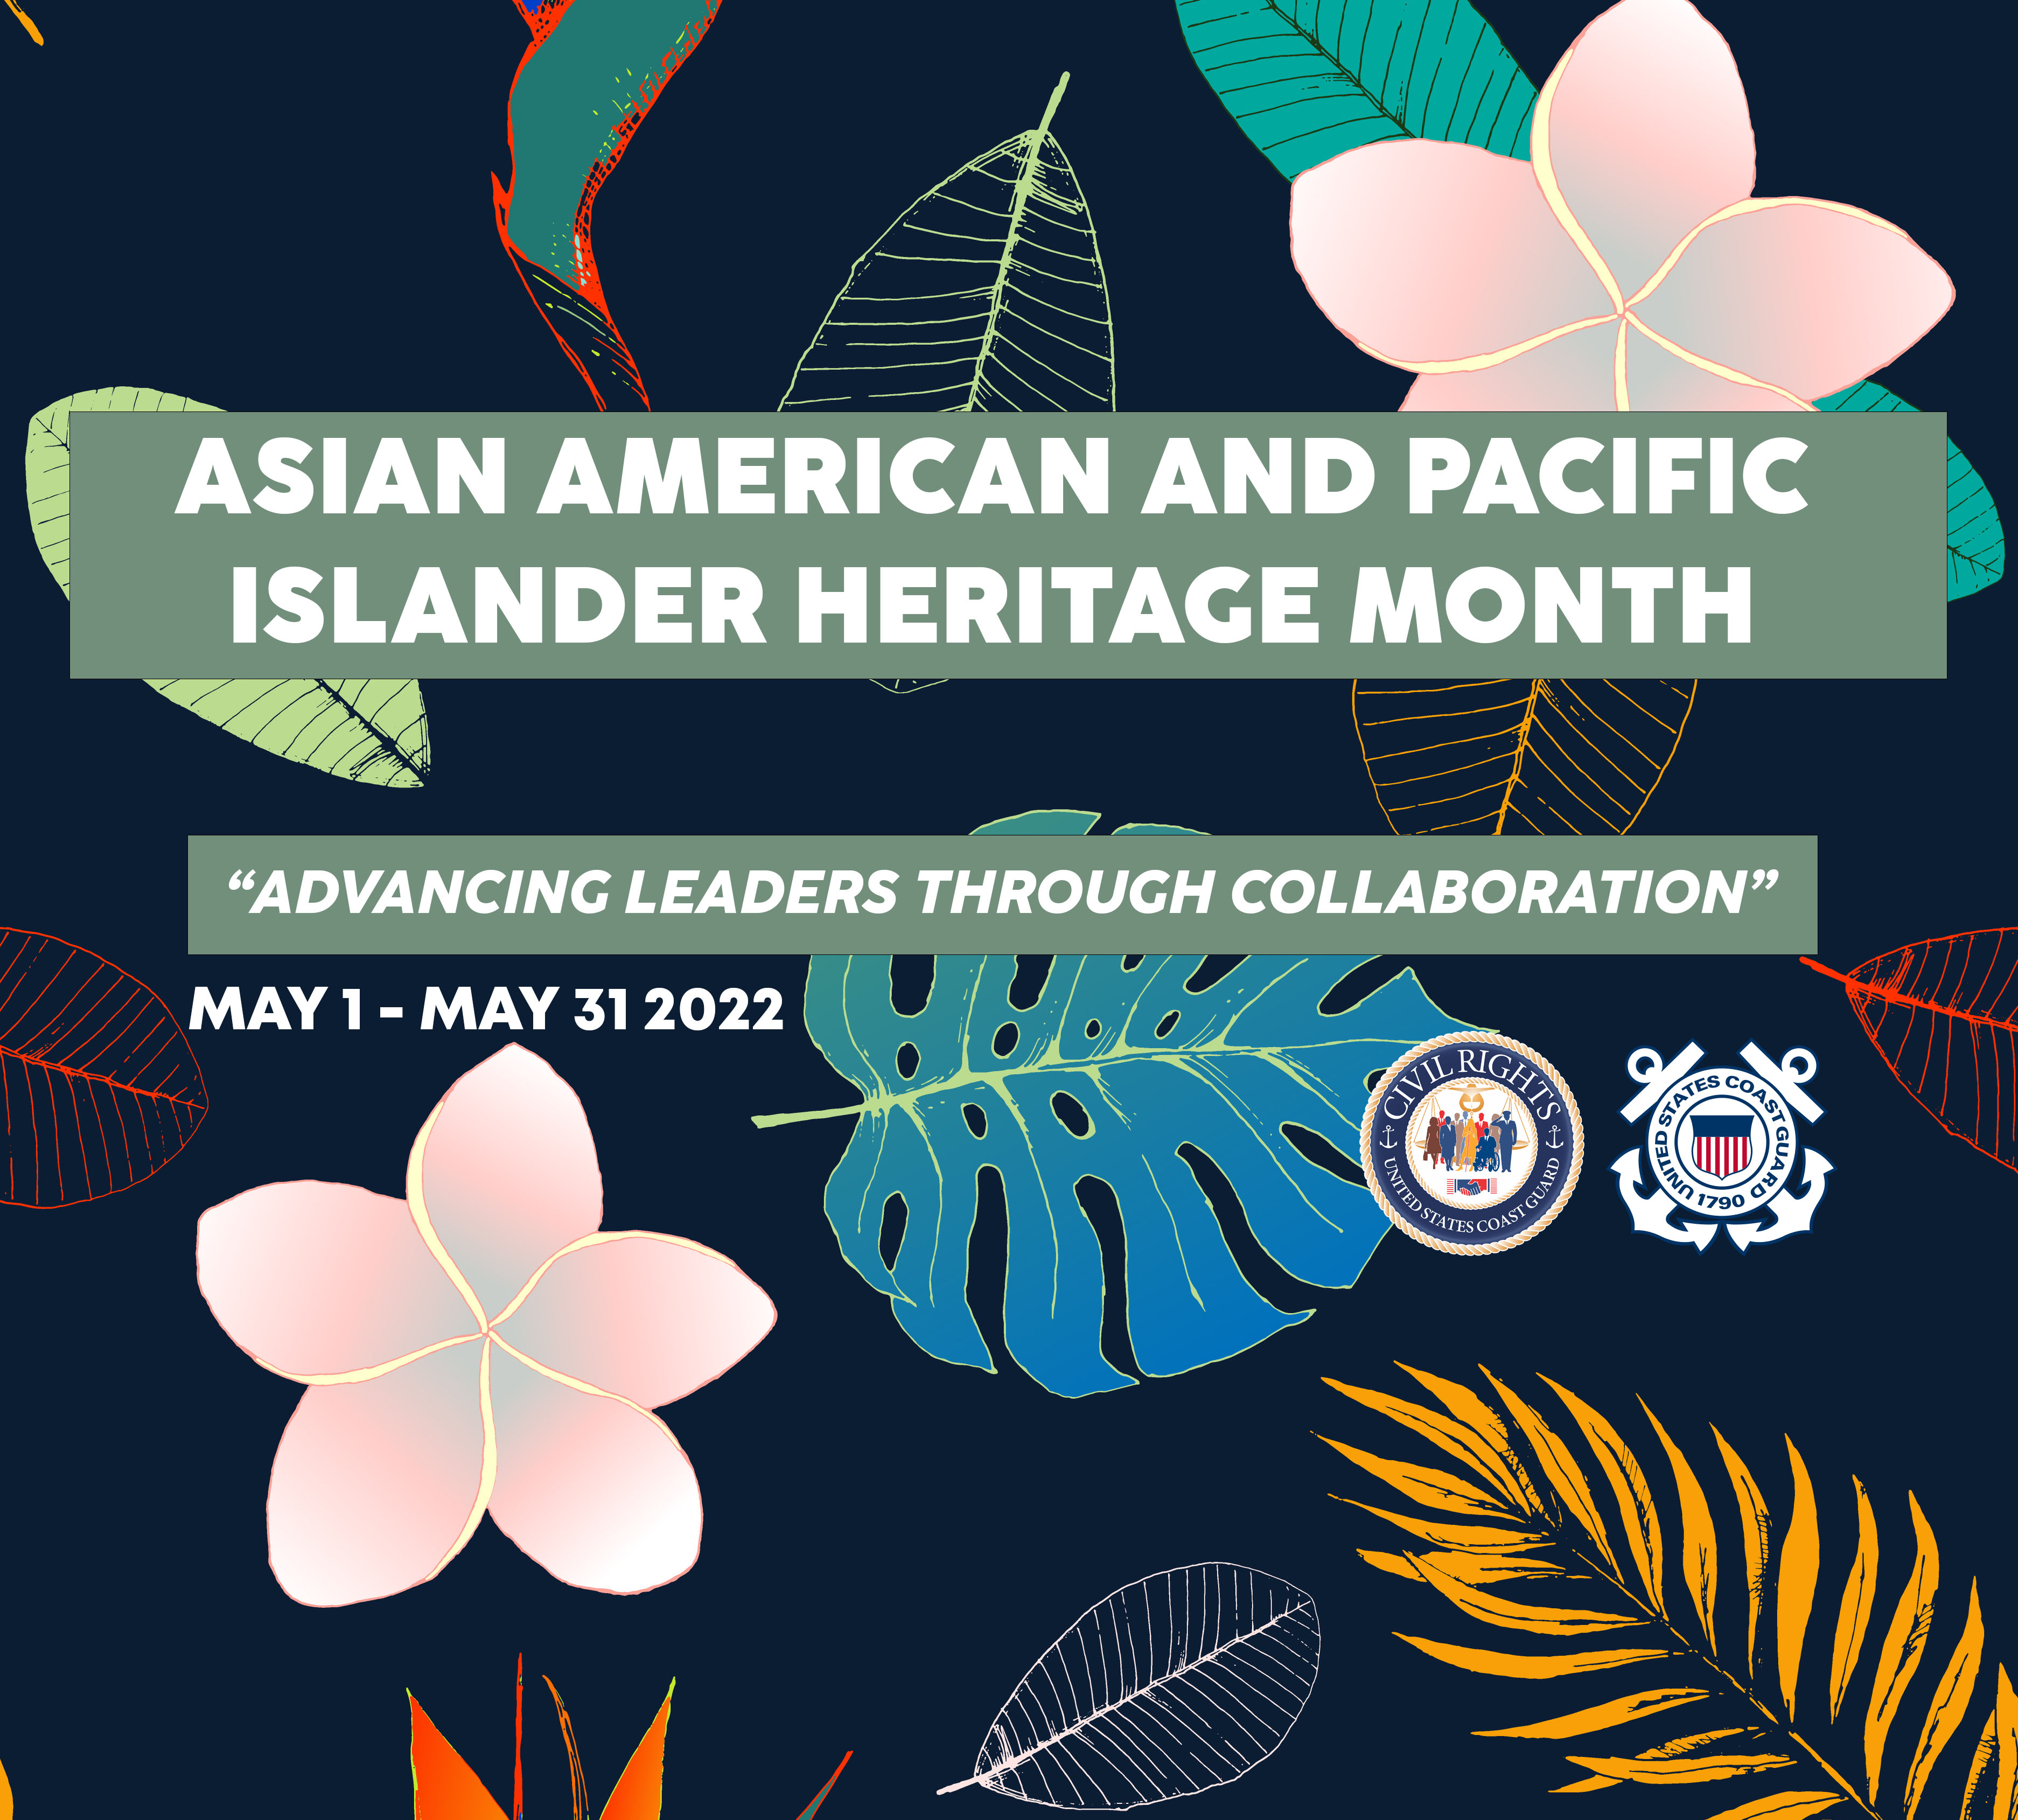 Commandant S Message On Asian American And Pacific Islander Heritage Month United States Coast